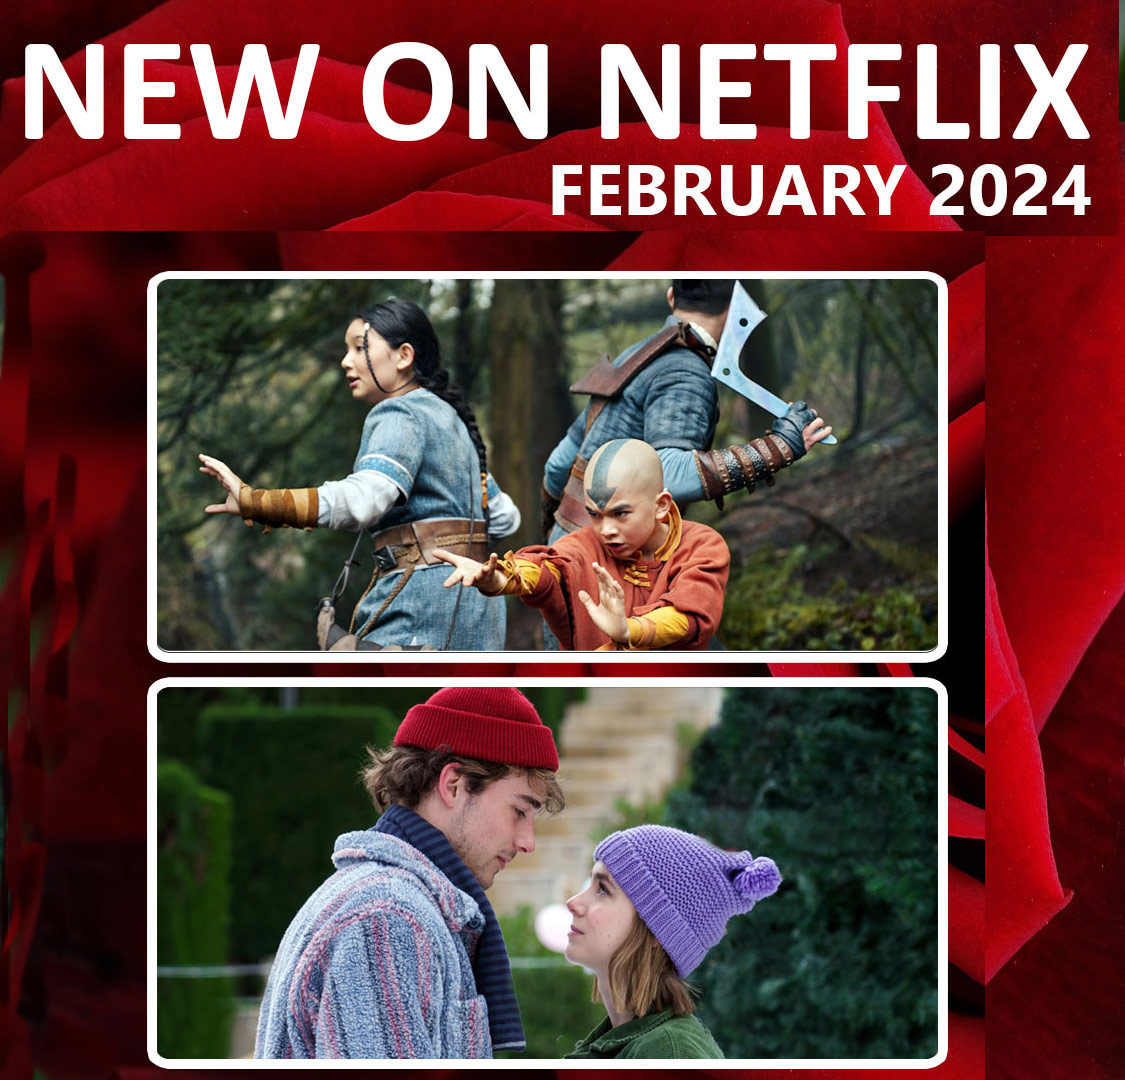 What's New on Netflix February 2024 and what's leaving